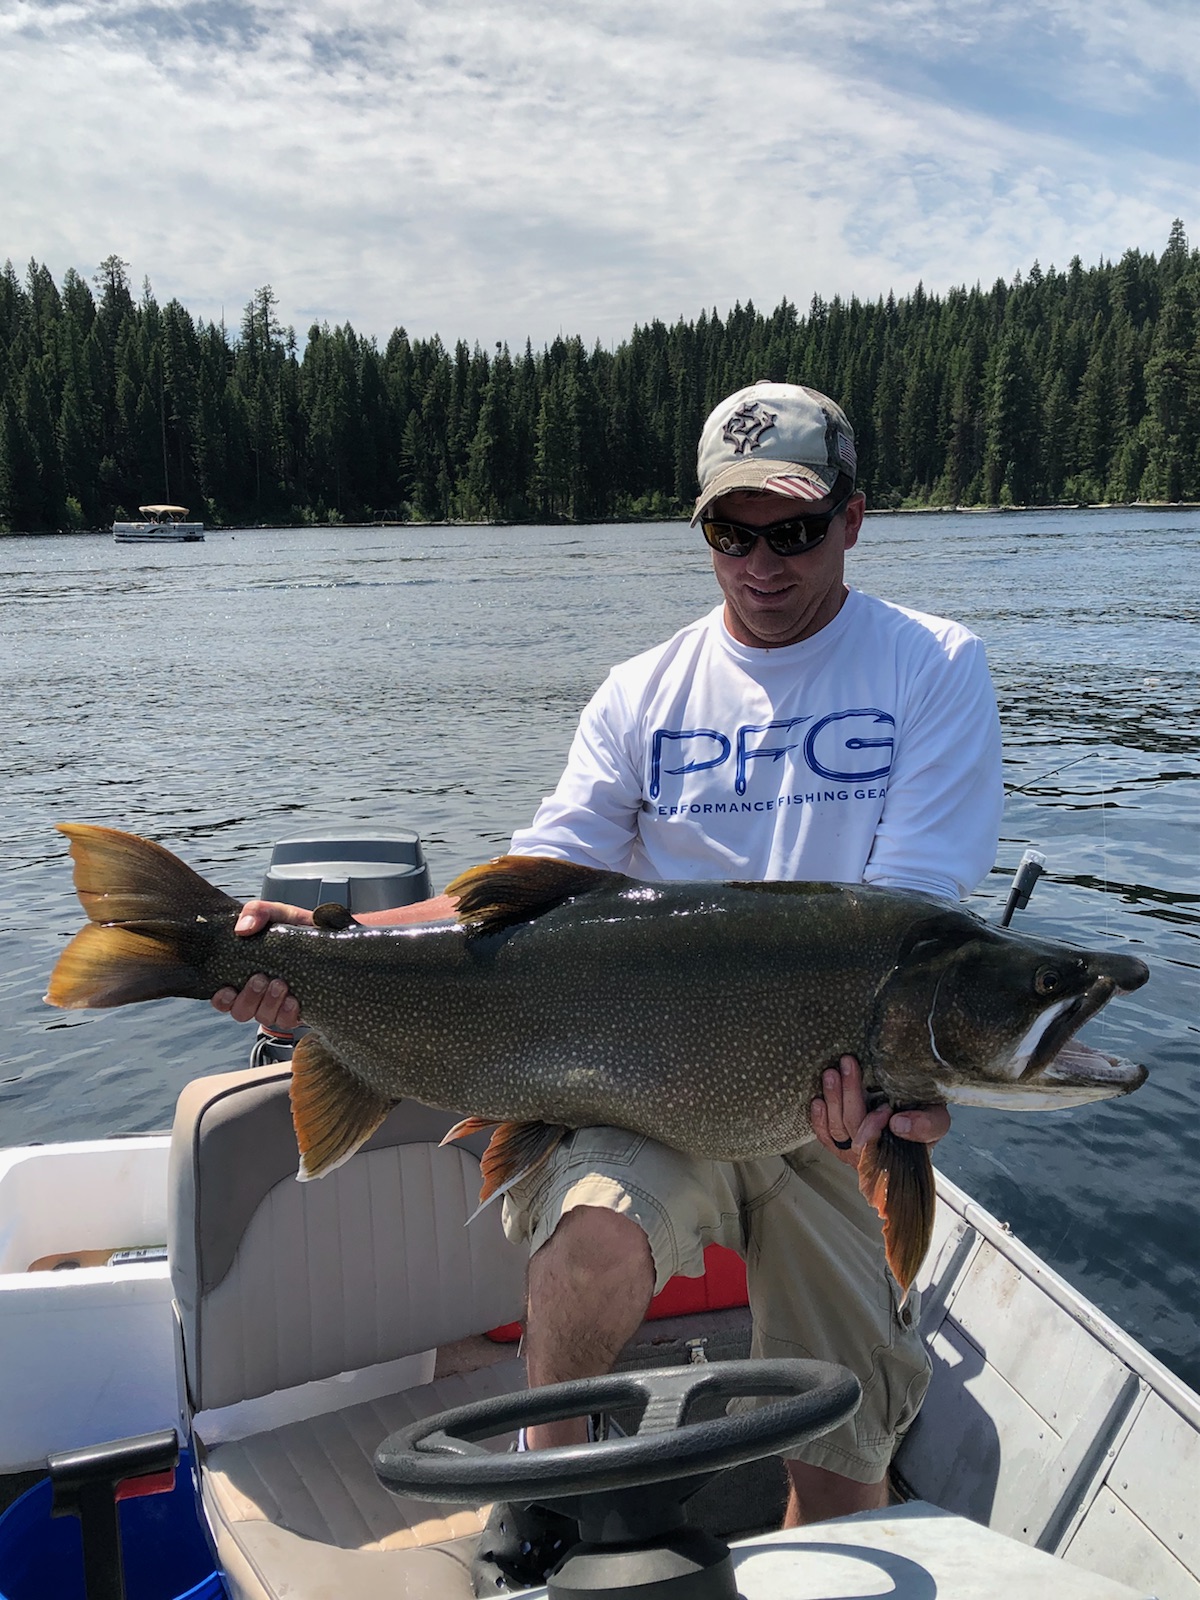 McCallarea provides a variety of fishing opportunities Idaho Fish